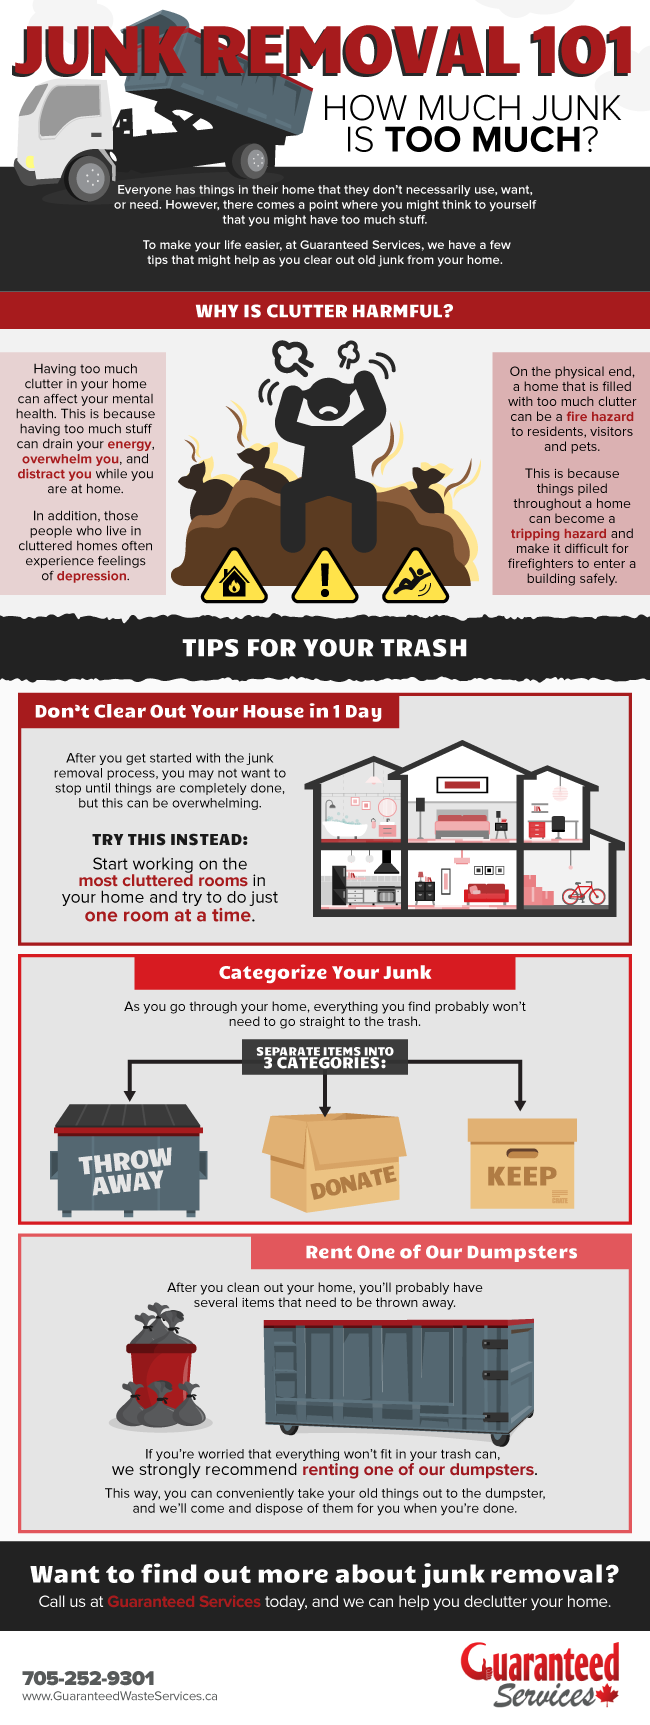 How to Get the Most Out of Your Next Junk Removal Project